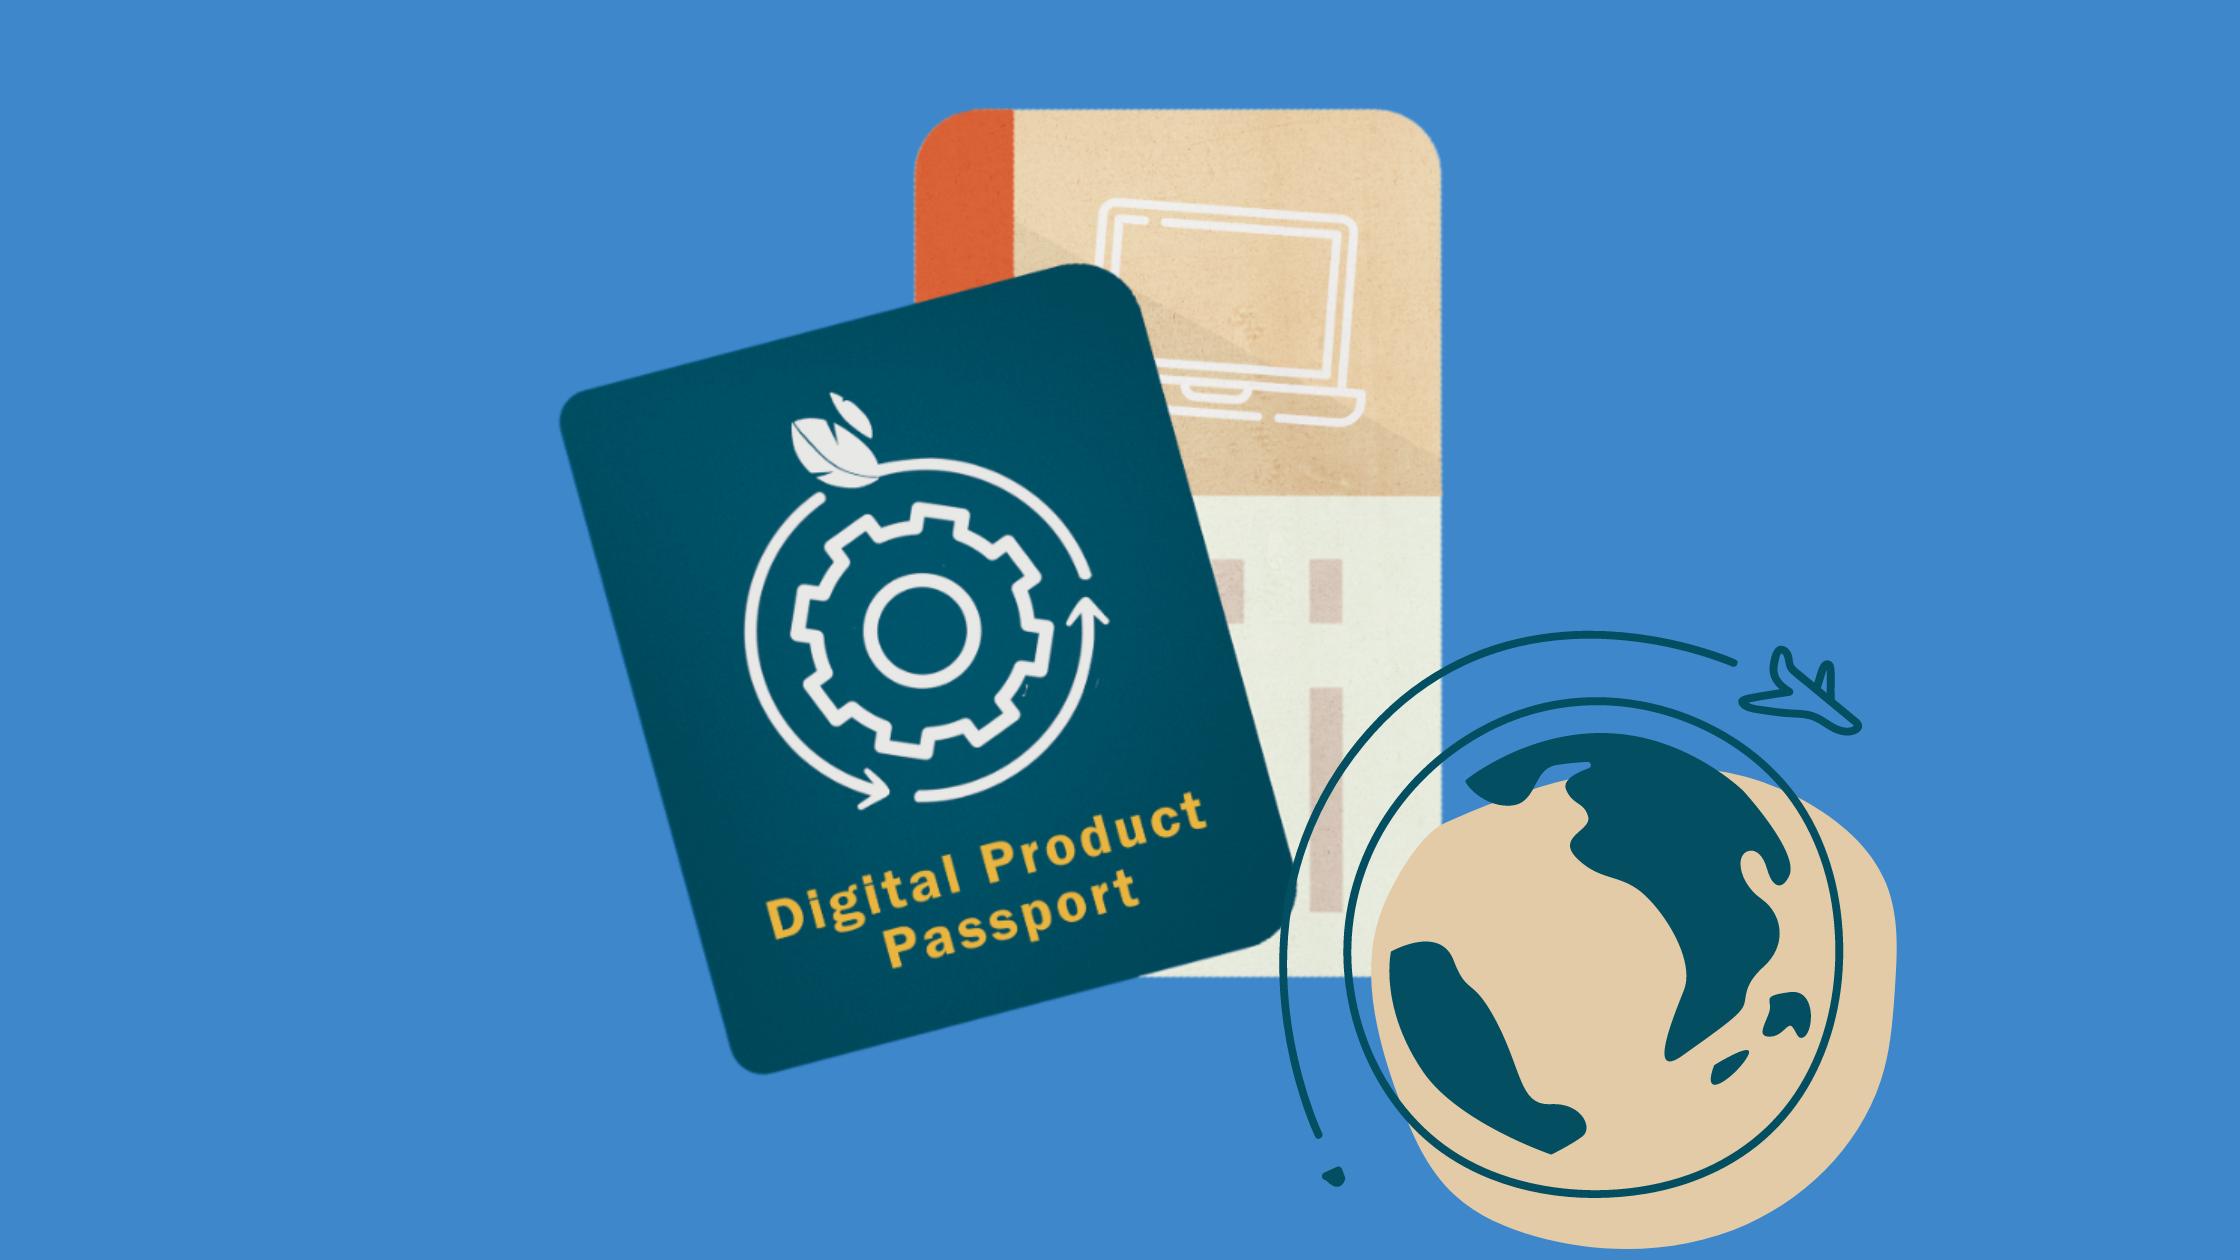 Are You Ready for Digital Product Passports?